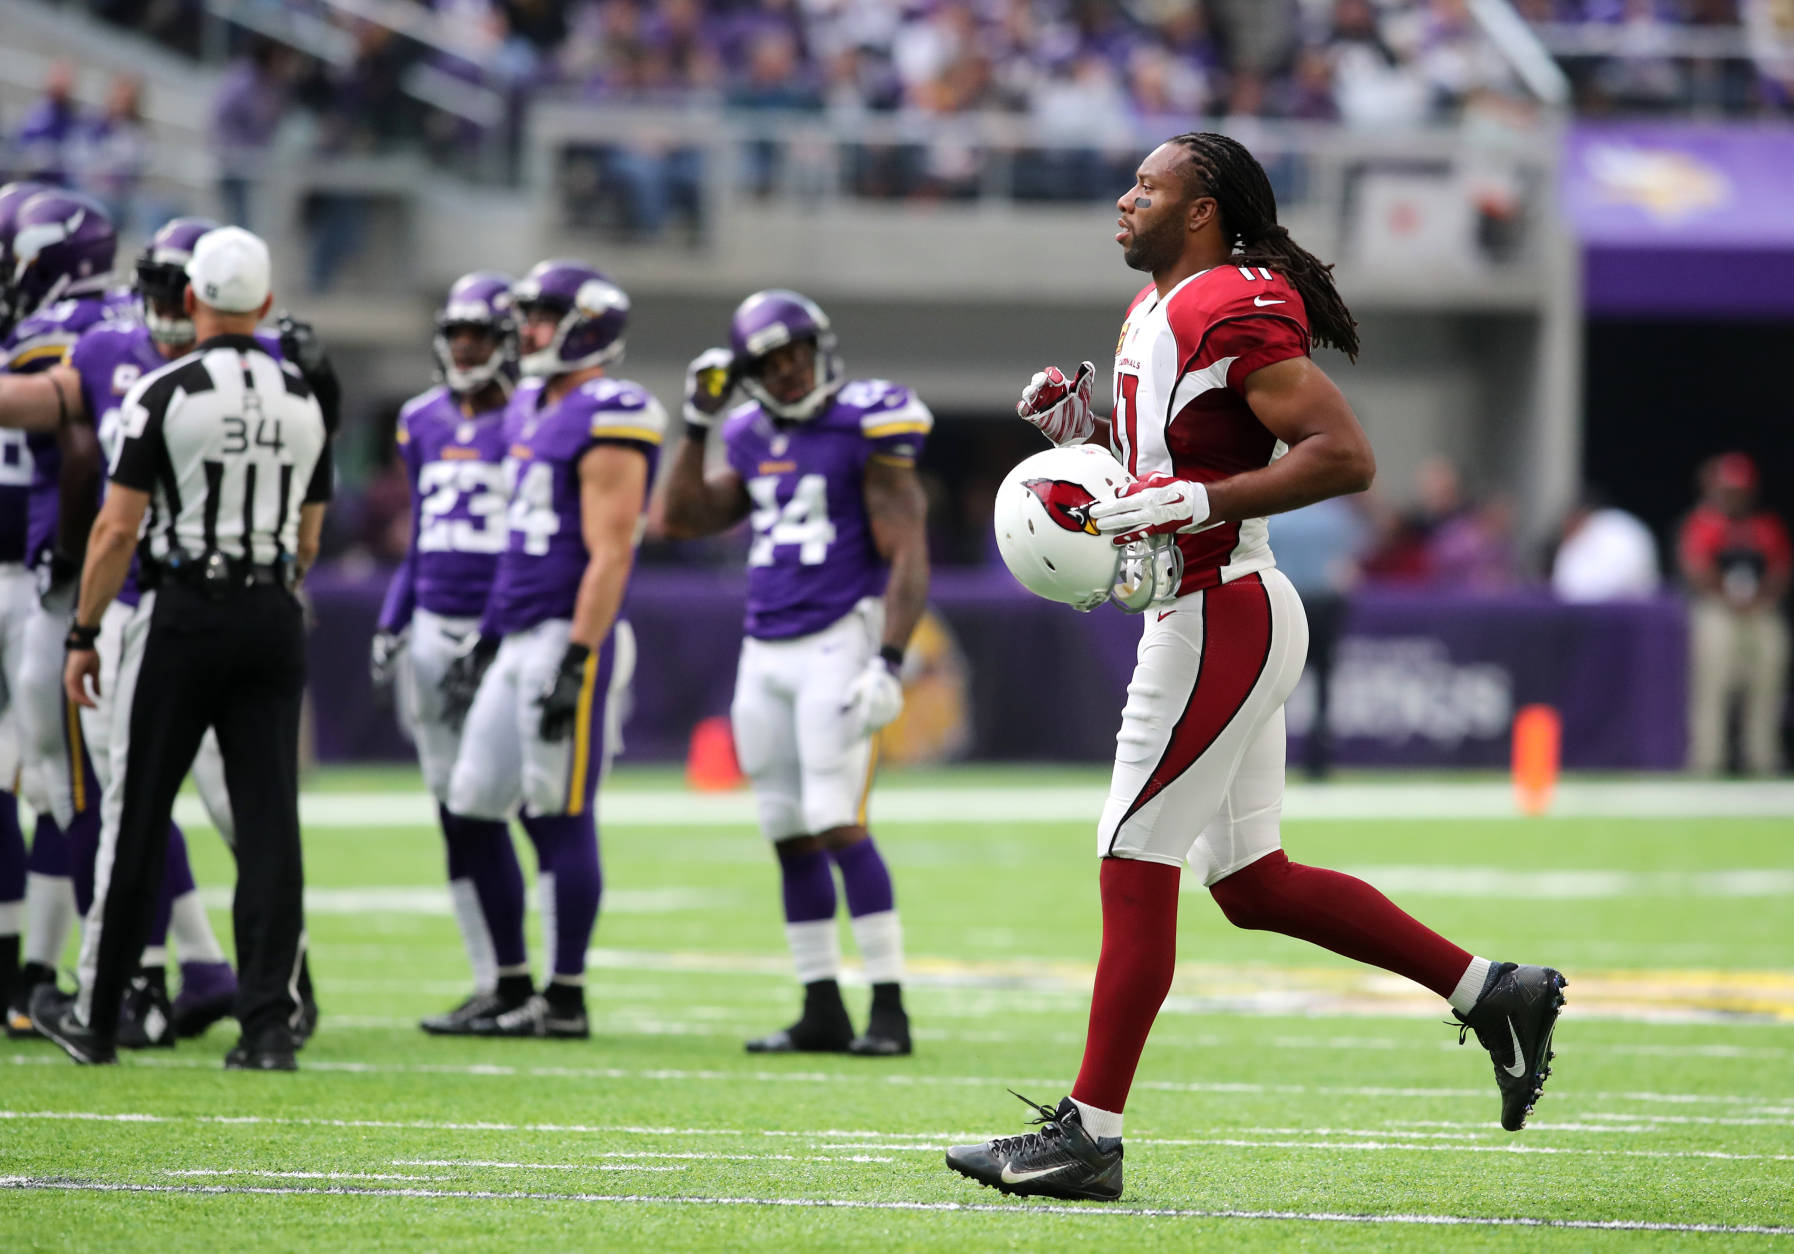 MINNEAPOLIS, MN - NOVEMBER 20: Larry Fitzgerald #11 of the Arizona Cardinals takes the field in the second of the game on November 20, 2016 at US Bank Stadium in Minneapolis, Minnesota. (Photo by Adam Bettcher/Getty Images)